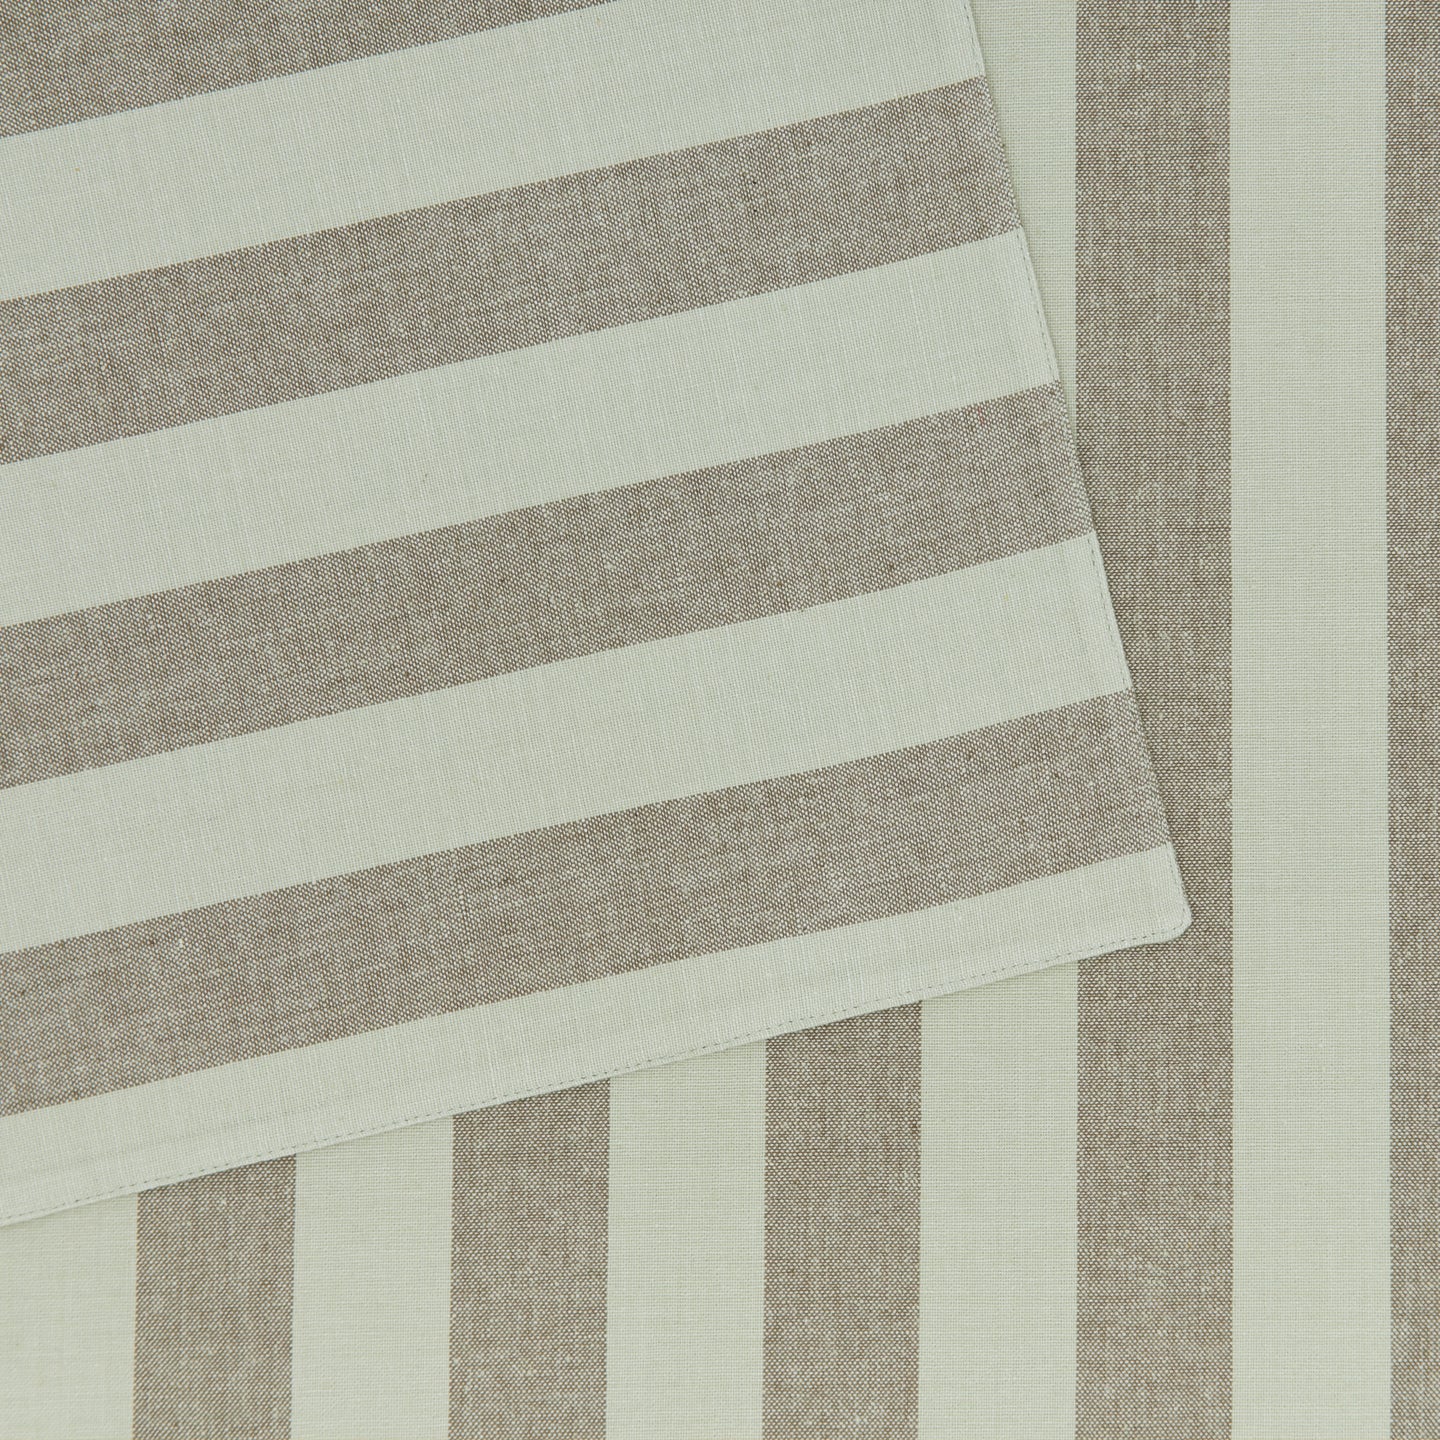 ESSENTIAL STRIPED PLACEMATS (SET OF 4) - OLIVE & SAGE